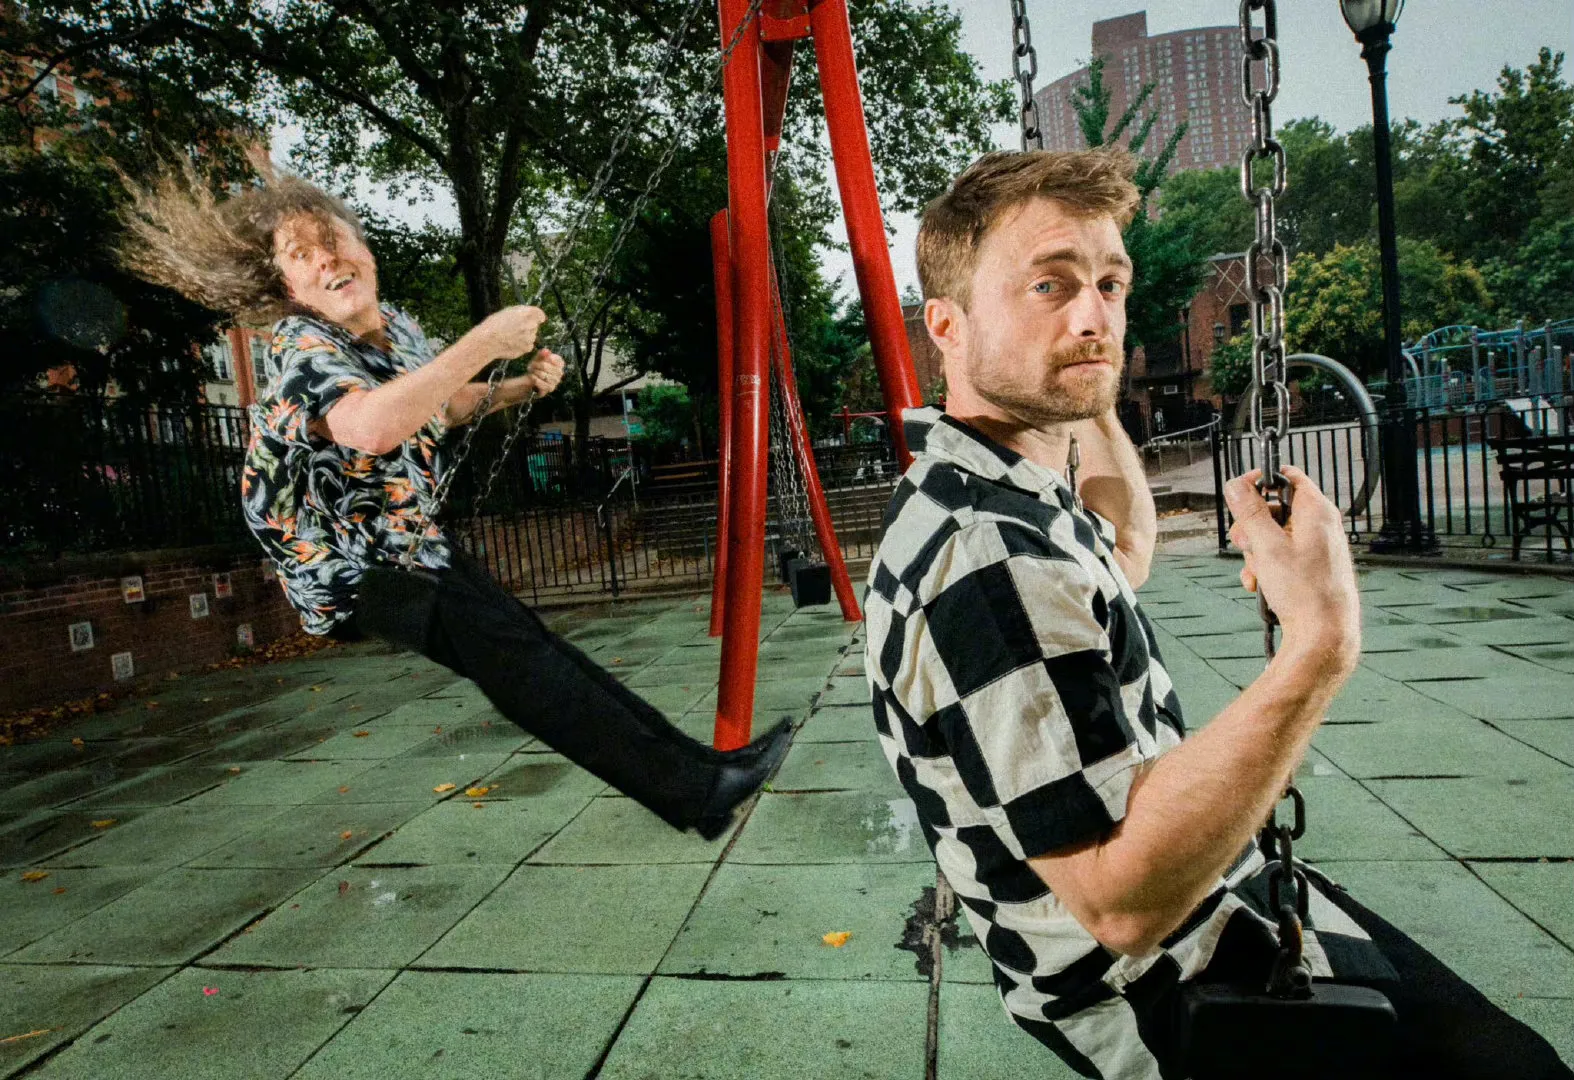 Daniel Radcliffe and 'Weird Al' Yankovic in 'The New York Times' New Photo | FMV6